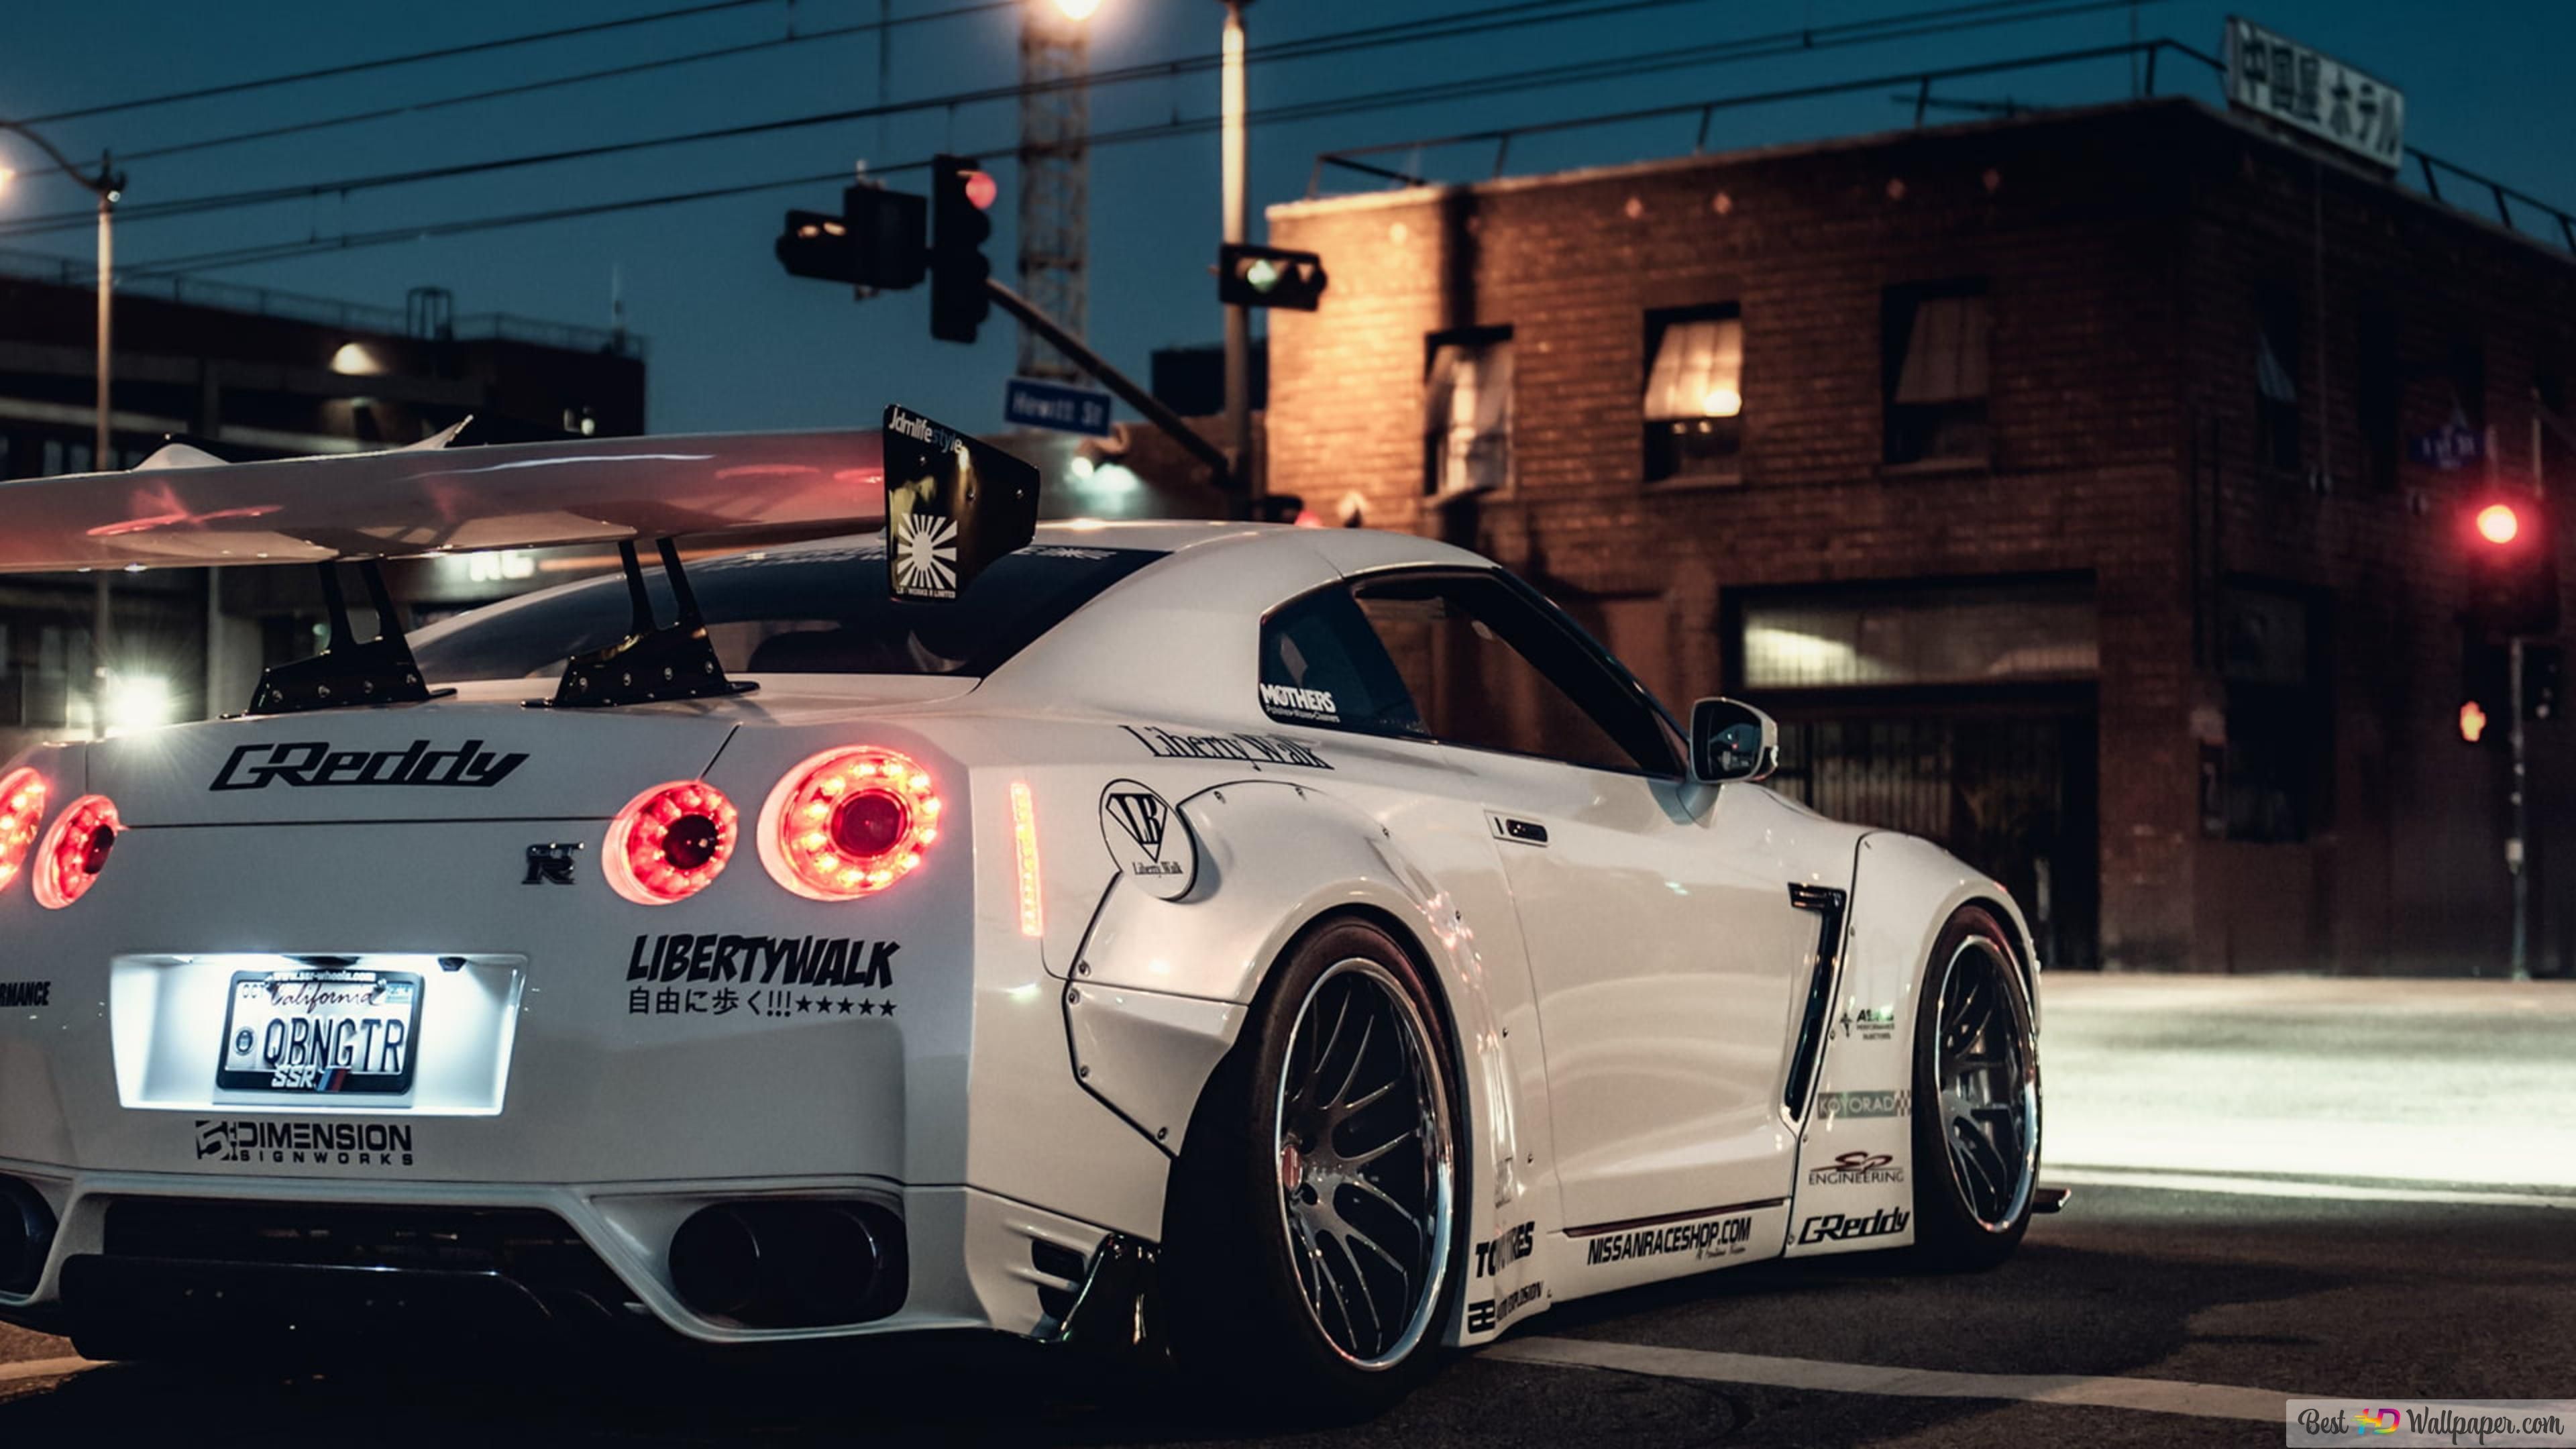 Free download White nissan skyline gtr r35 coupe 4K wallpaper download [3840x2160] for your Desktop, Mobile & Tablet. Explore GTR R35 4K Wallpaper. Gtr Wallpaper, R34 Gtr Wallpaper, Gtr R34 Wallpaper